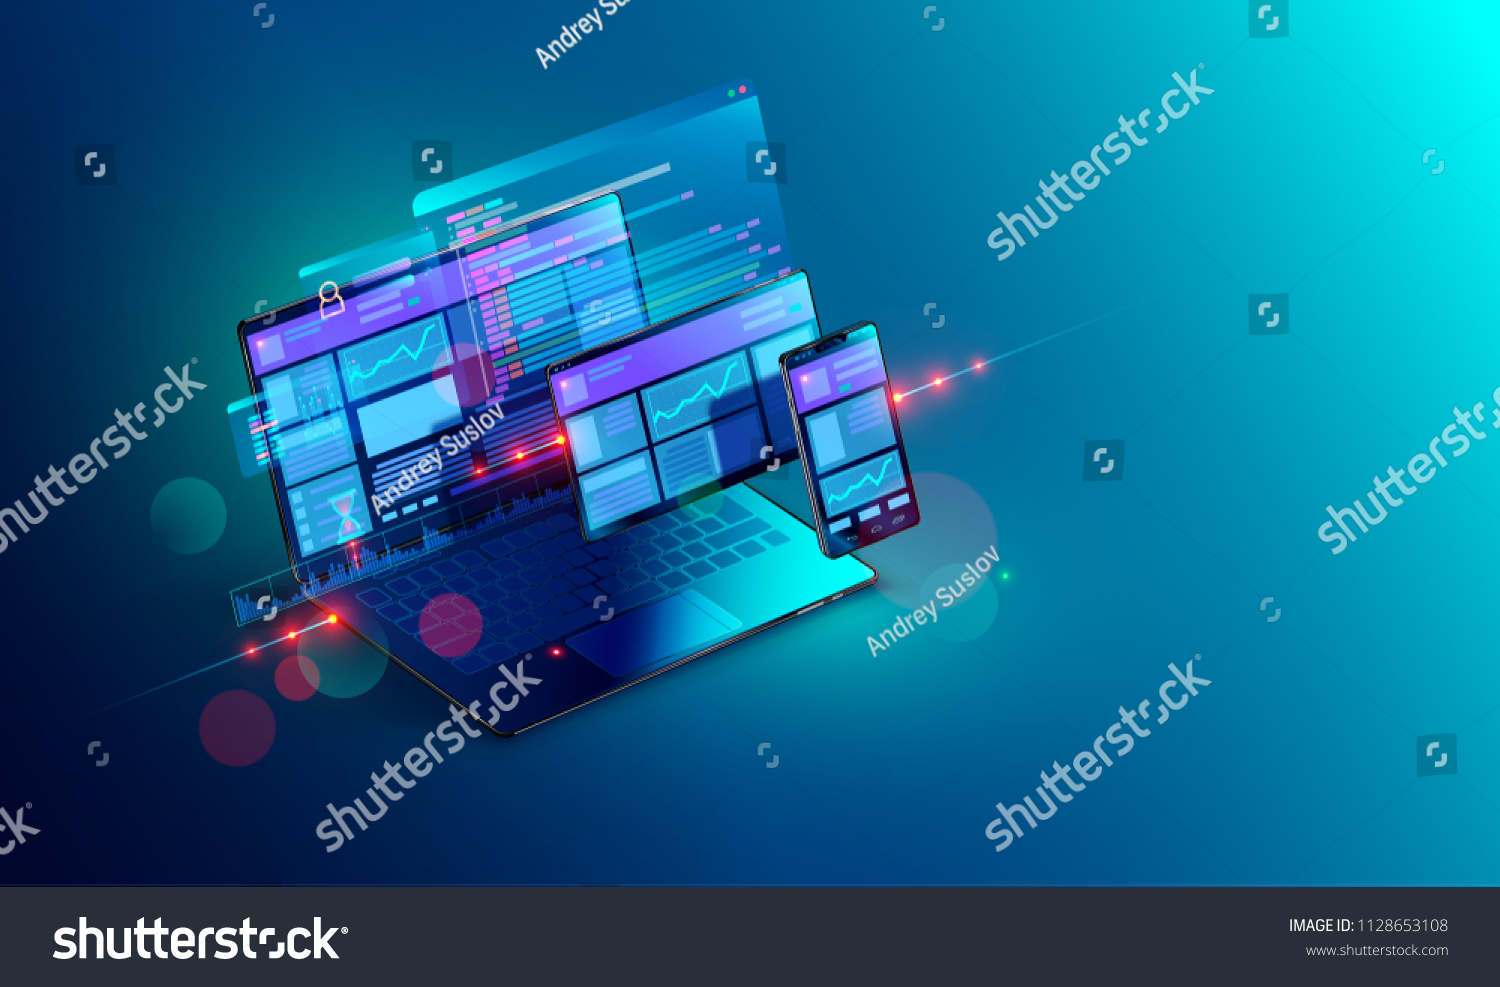 Web development and coding. Cross platform development website. Adaptive layout internet page or web interface on screen laptop, tablet and phone. Isometric concept illustration. #1128653108